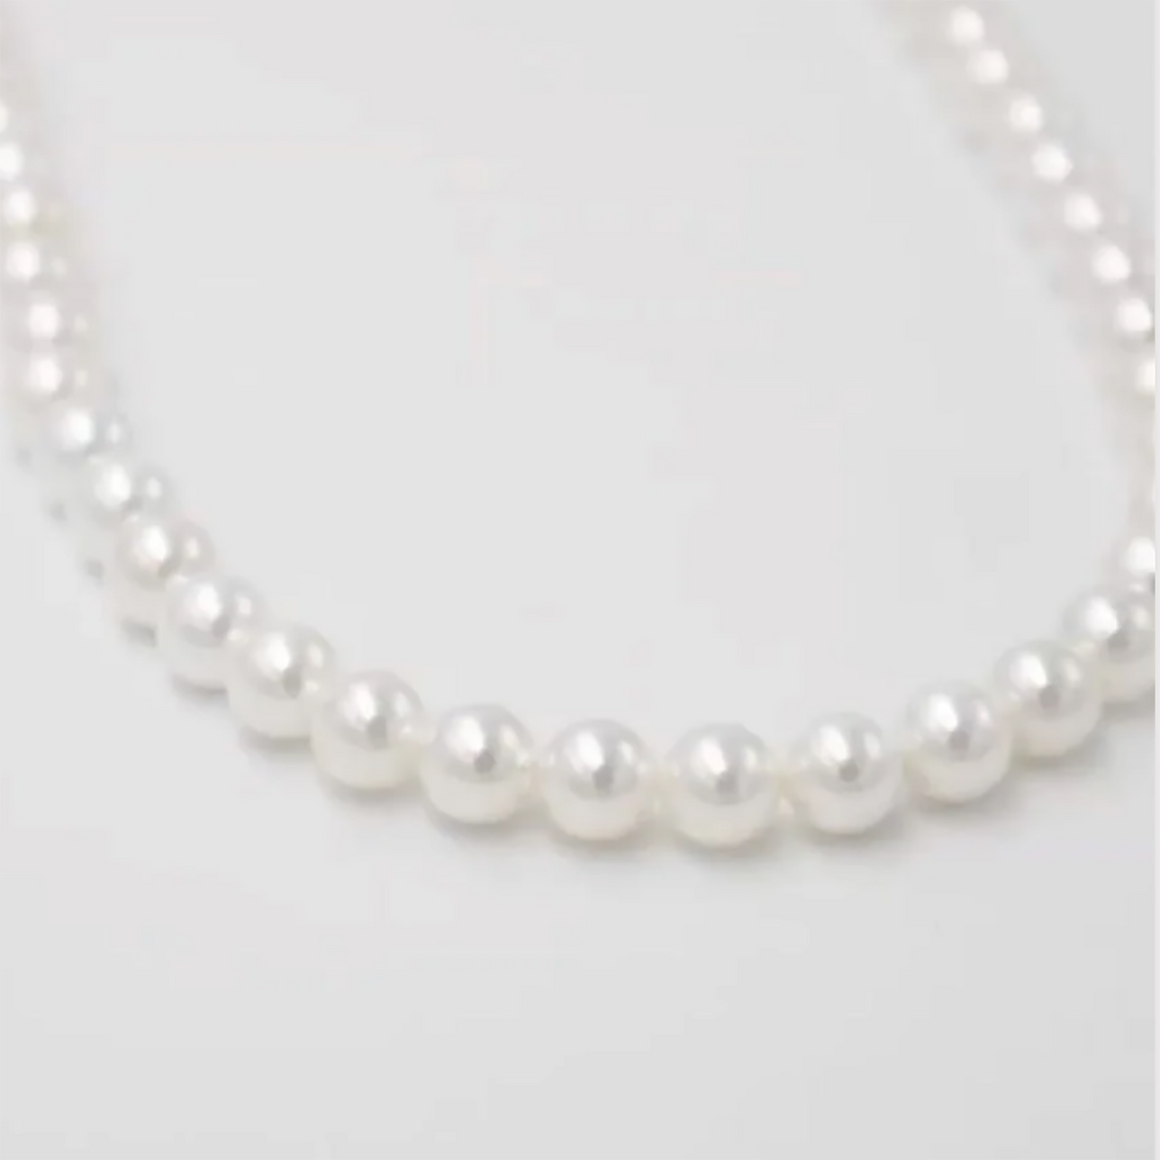 54 FLORAL 4mm PEARL NECKLACE BEAD NECKLACE CHAIN - CREAM